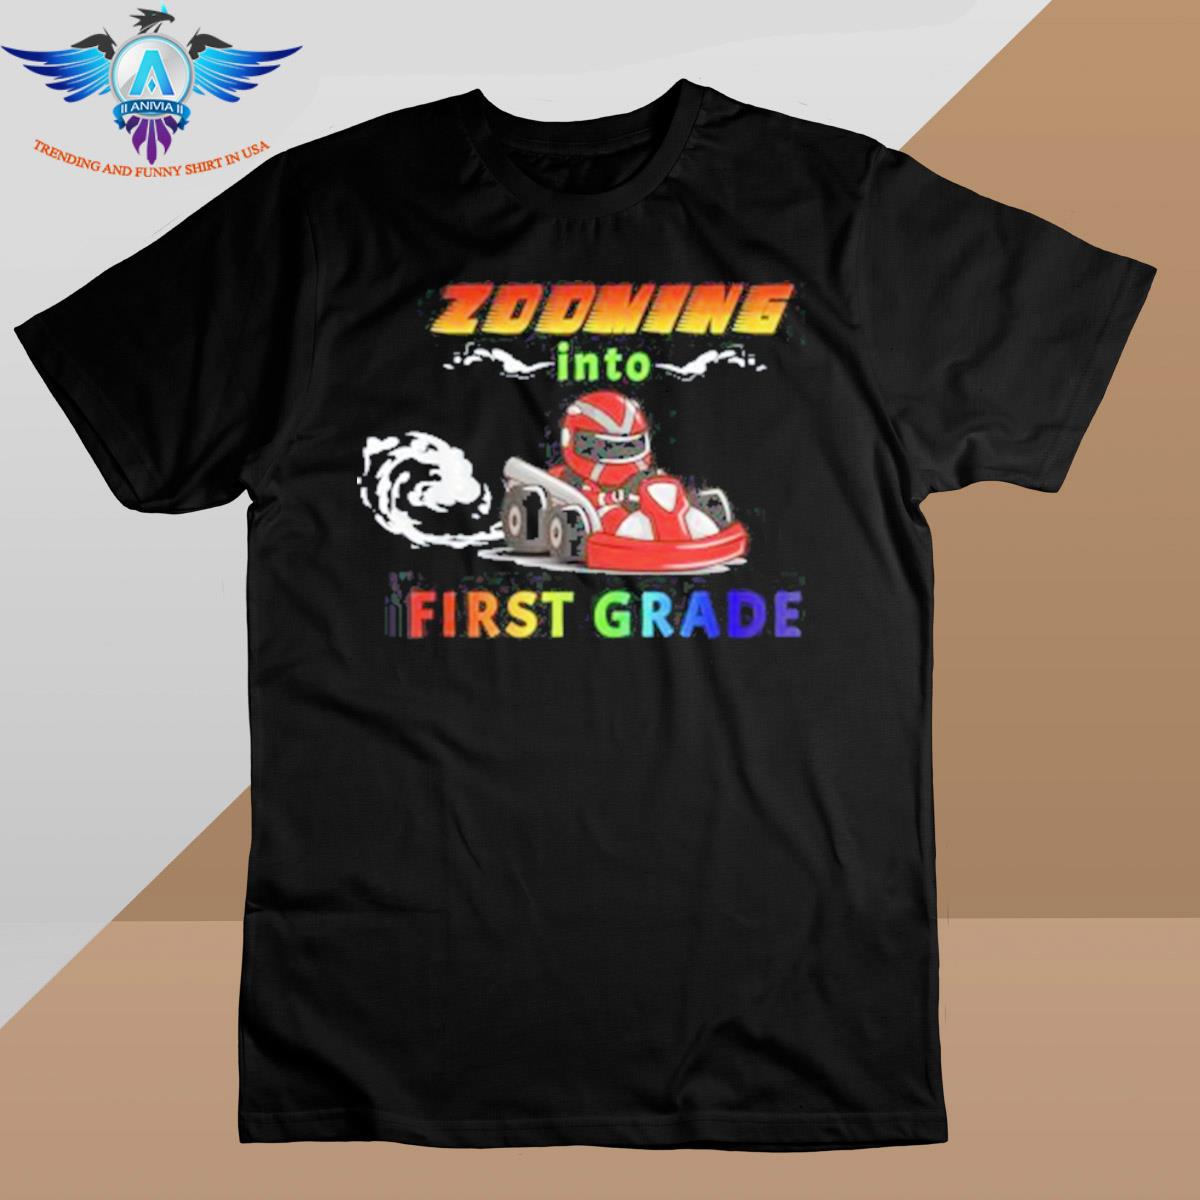 Race car back to school zooming into first grade shirt